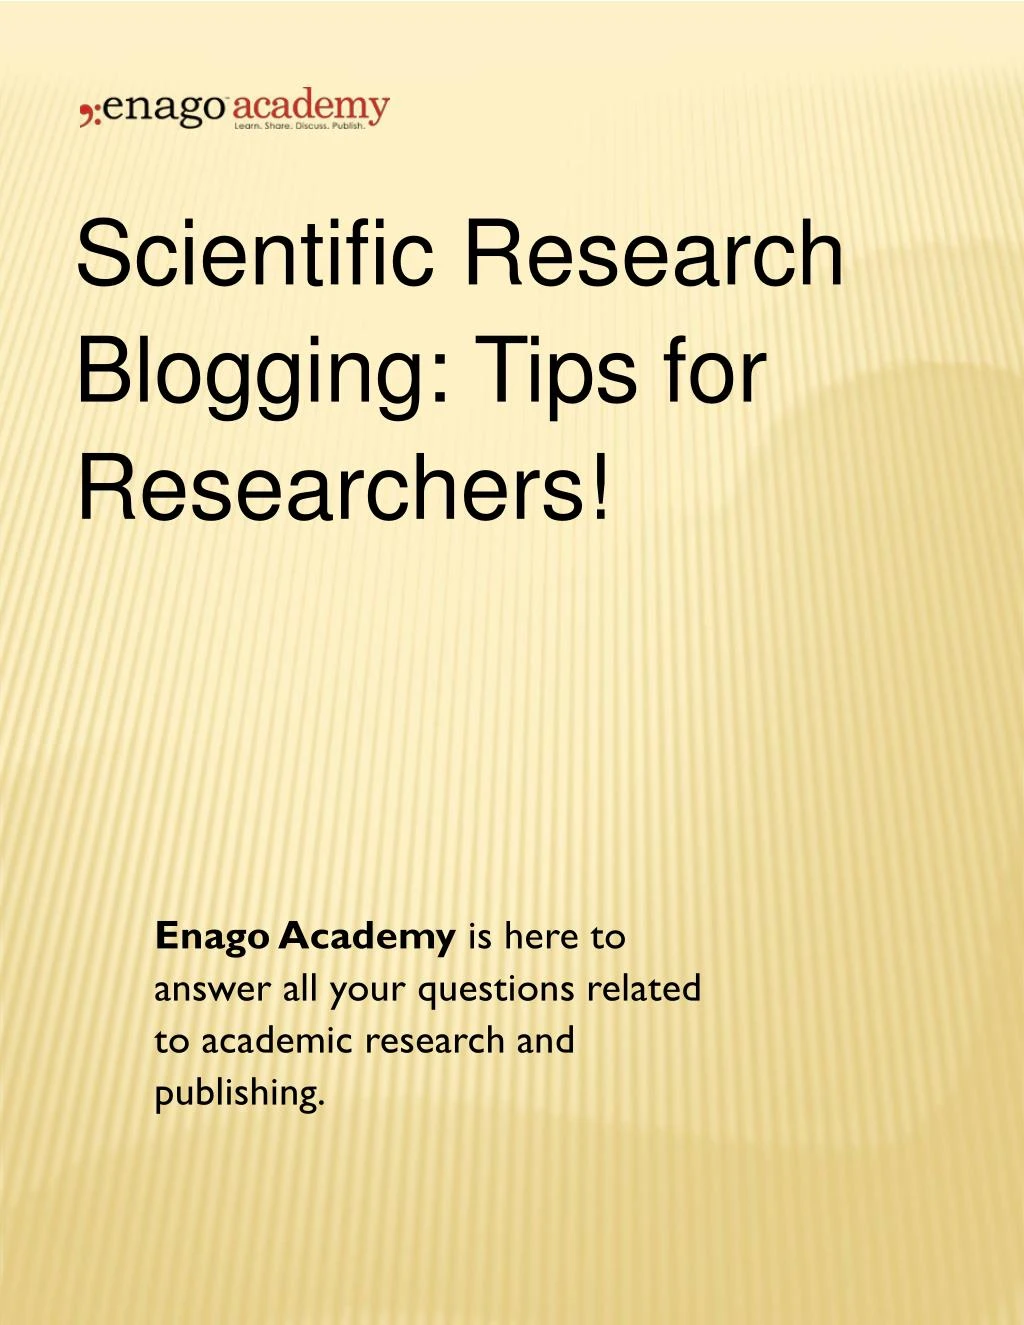 scientific research blogging tips for researchers